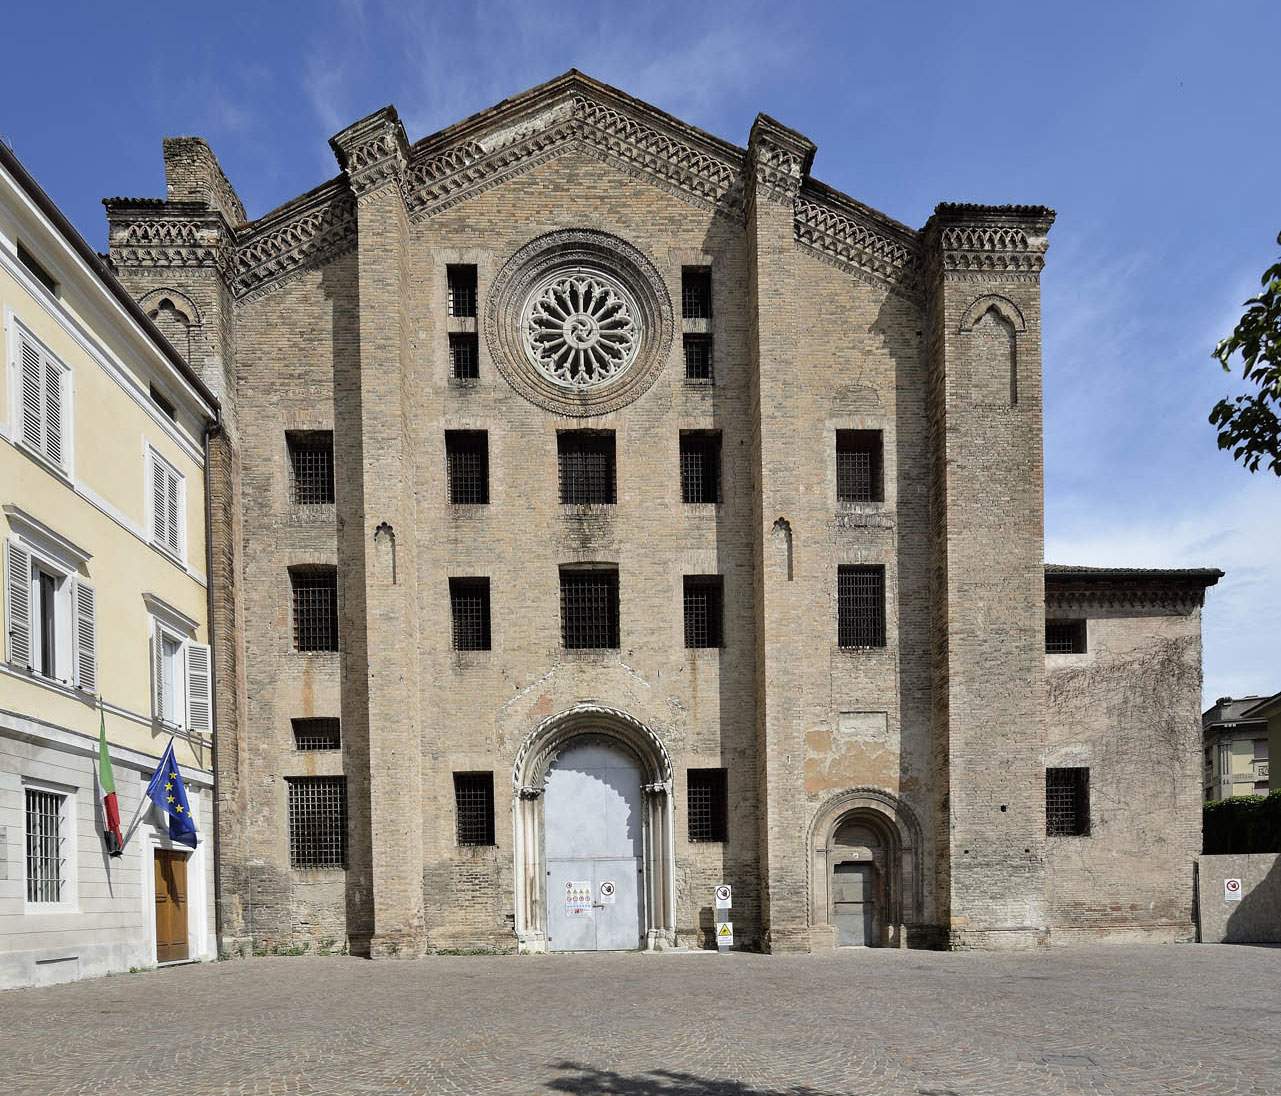 Parma, the church of San Francesco del Prato is reborn. It will be reopened to the public and worship in December